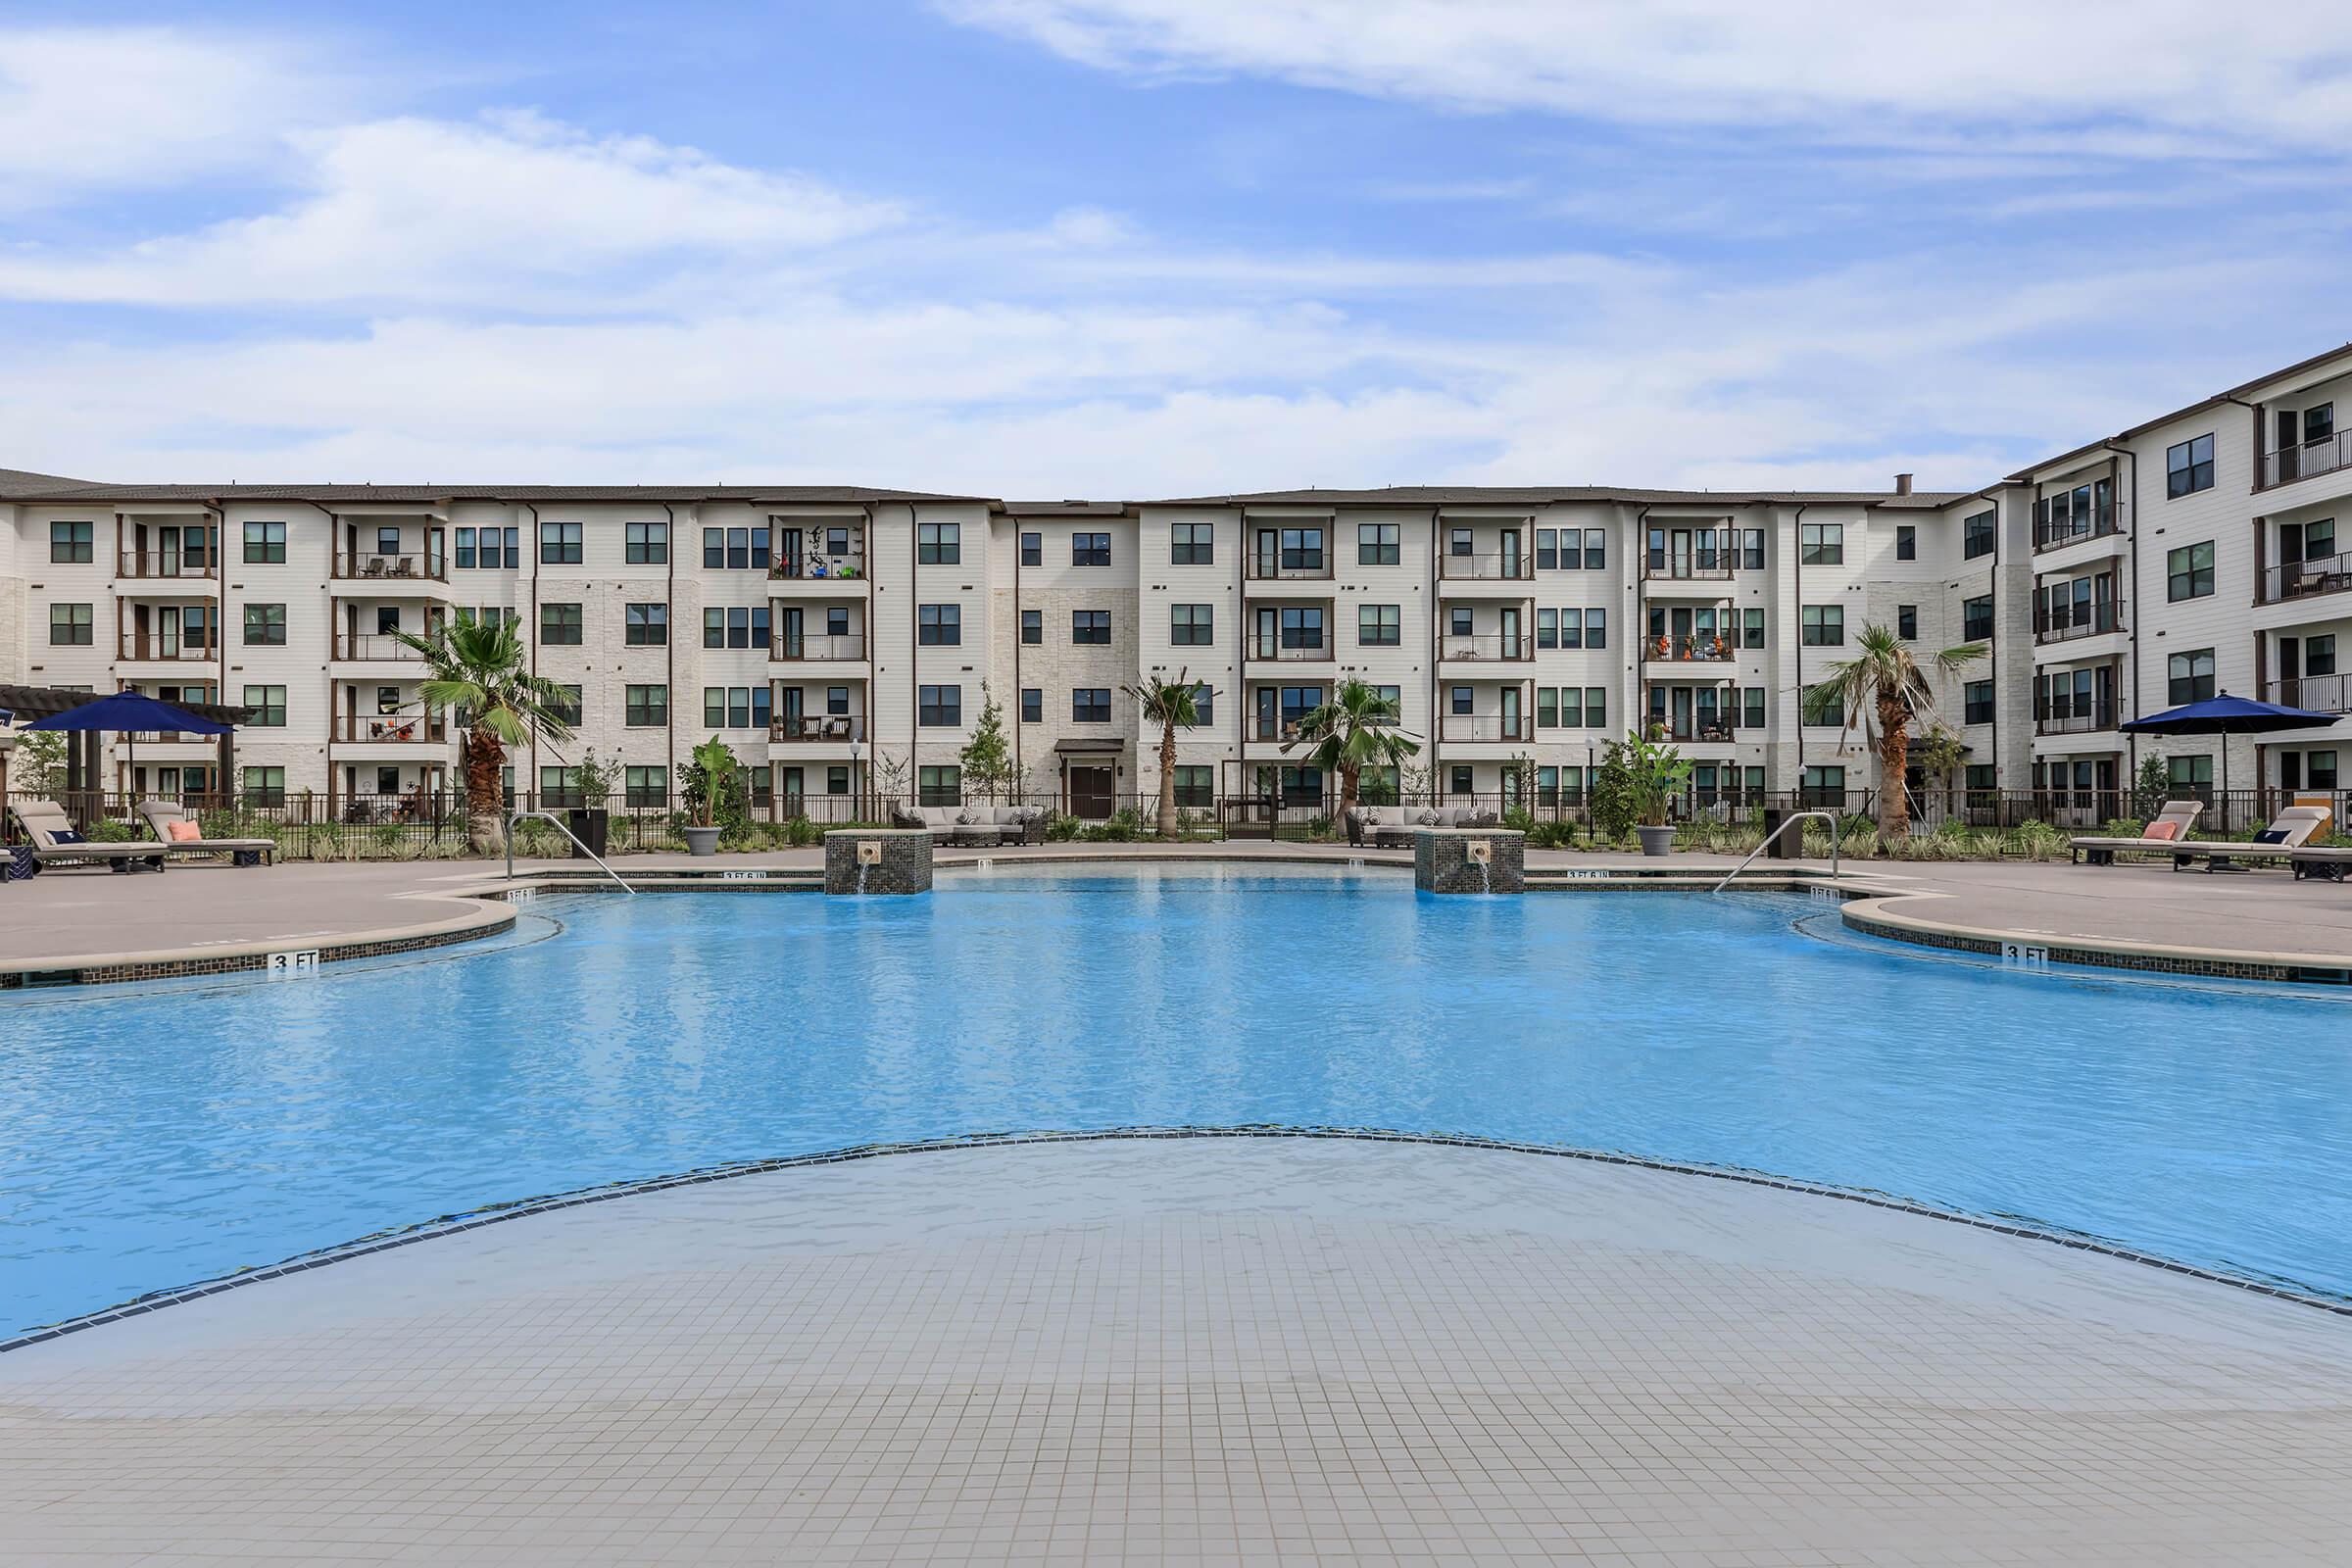 Ivy Point Cypress - Apartments In Cypress, Tx